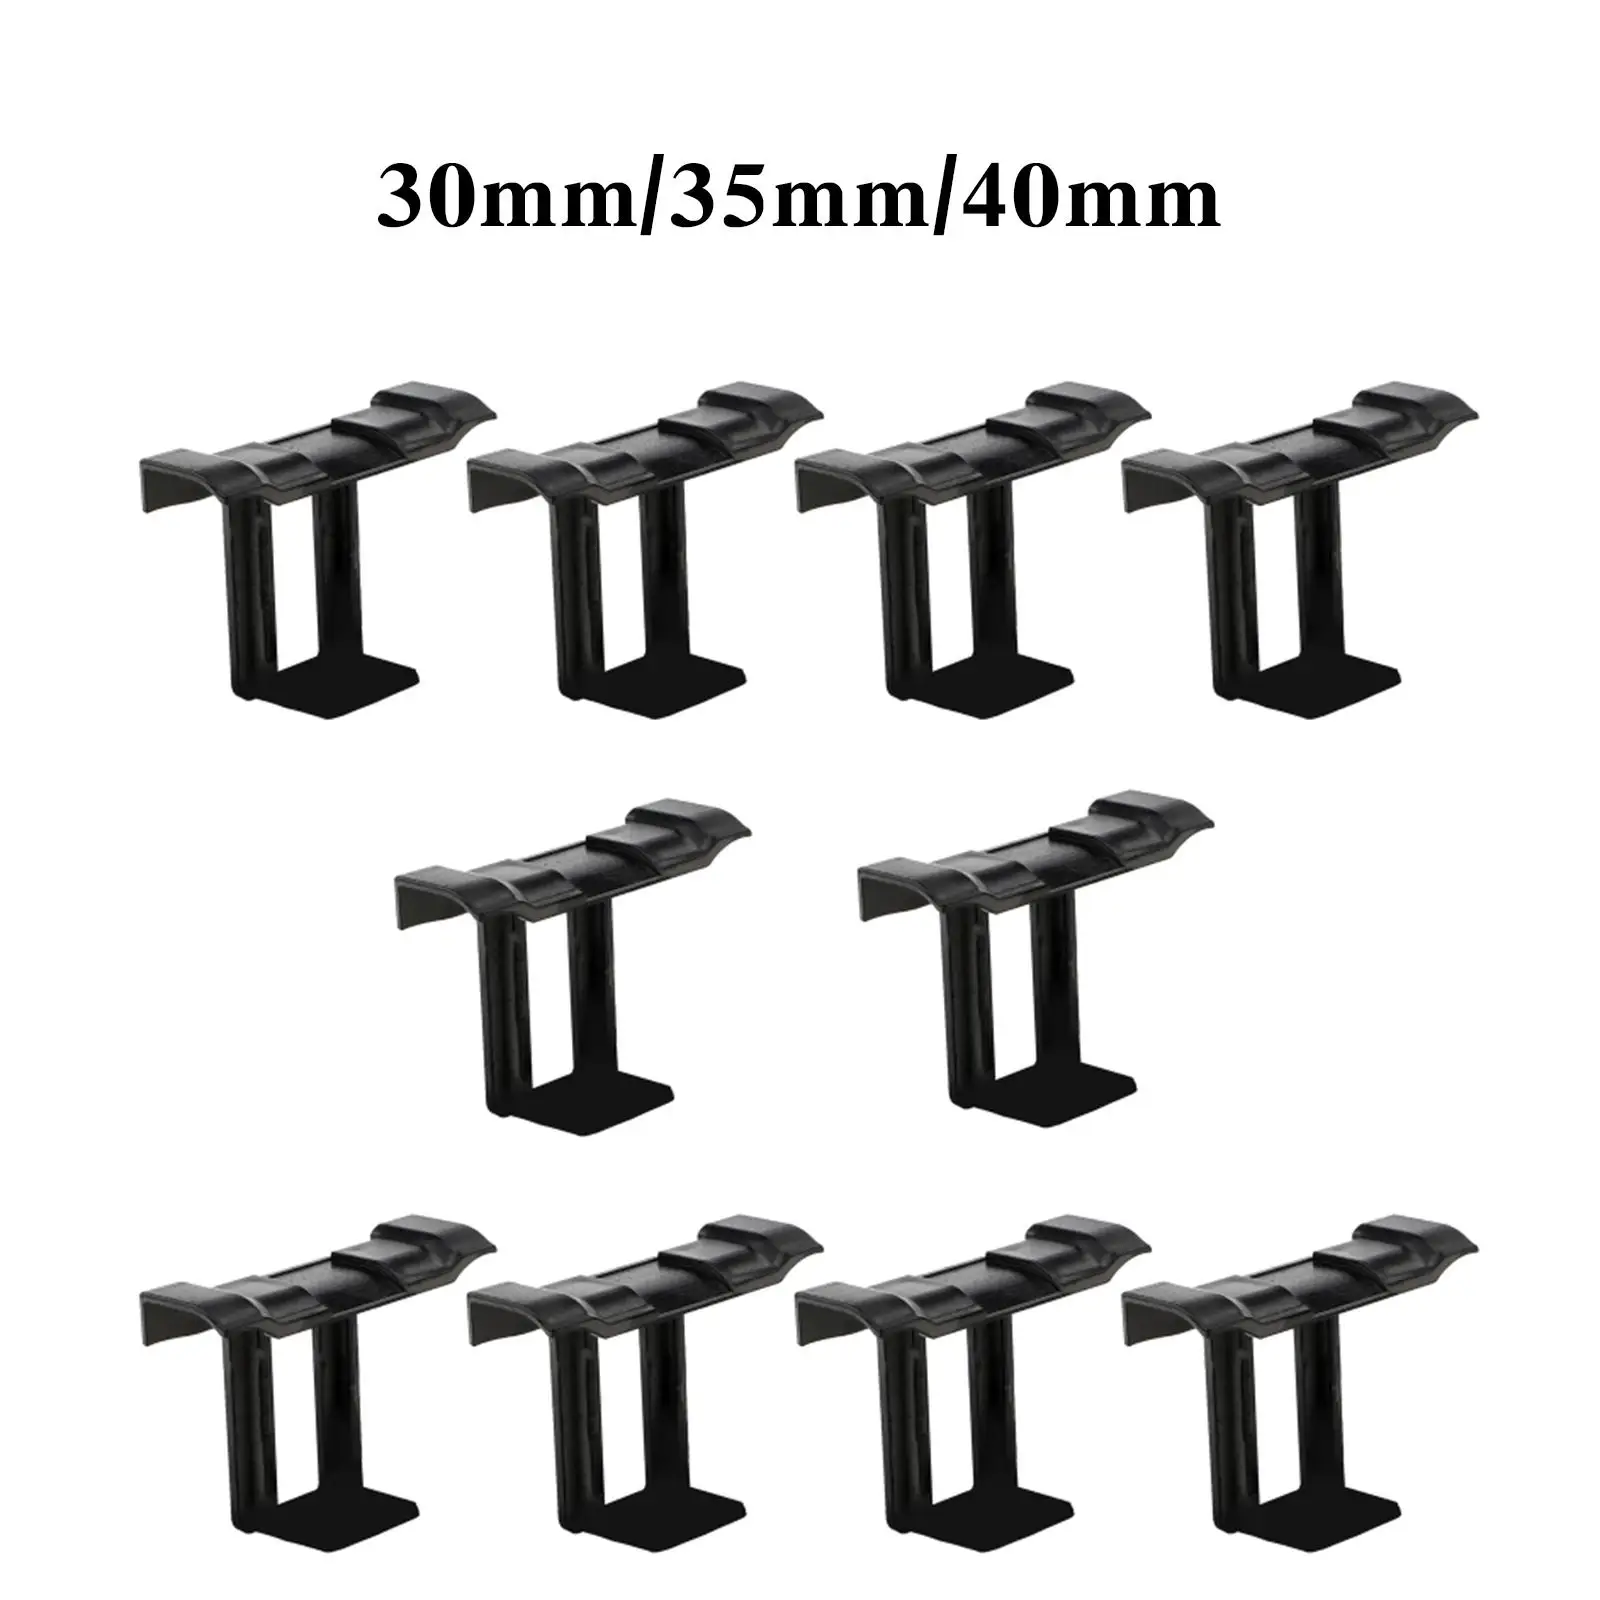 10 Pieces Water Drain Clips Auto Remove Stagnant Water Dust Photovoltaic Clip Pv Modules Cleaning Clips